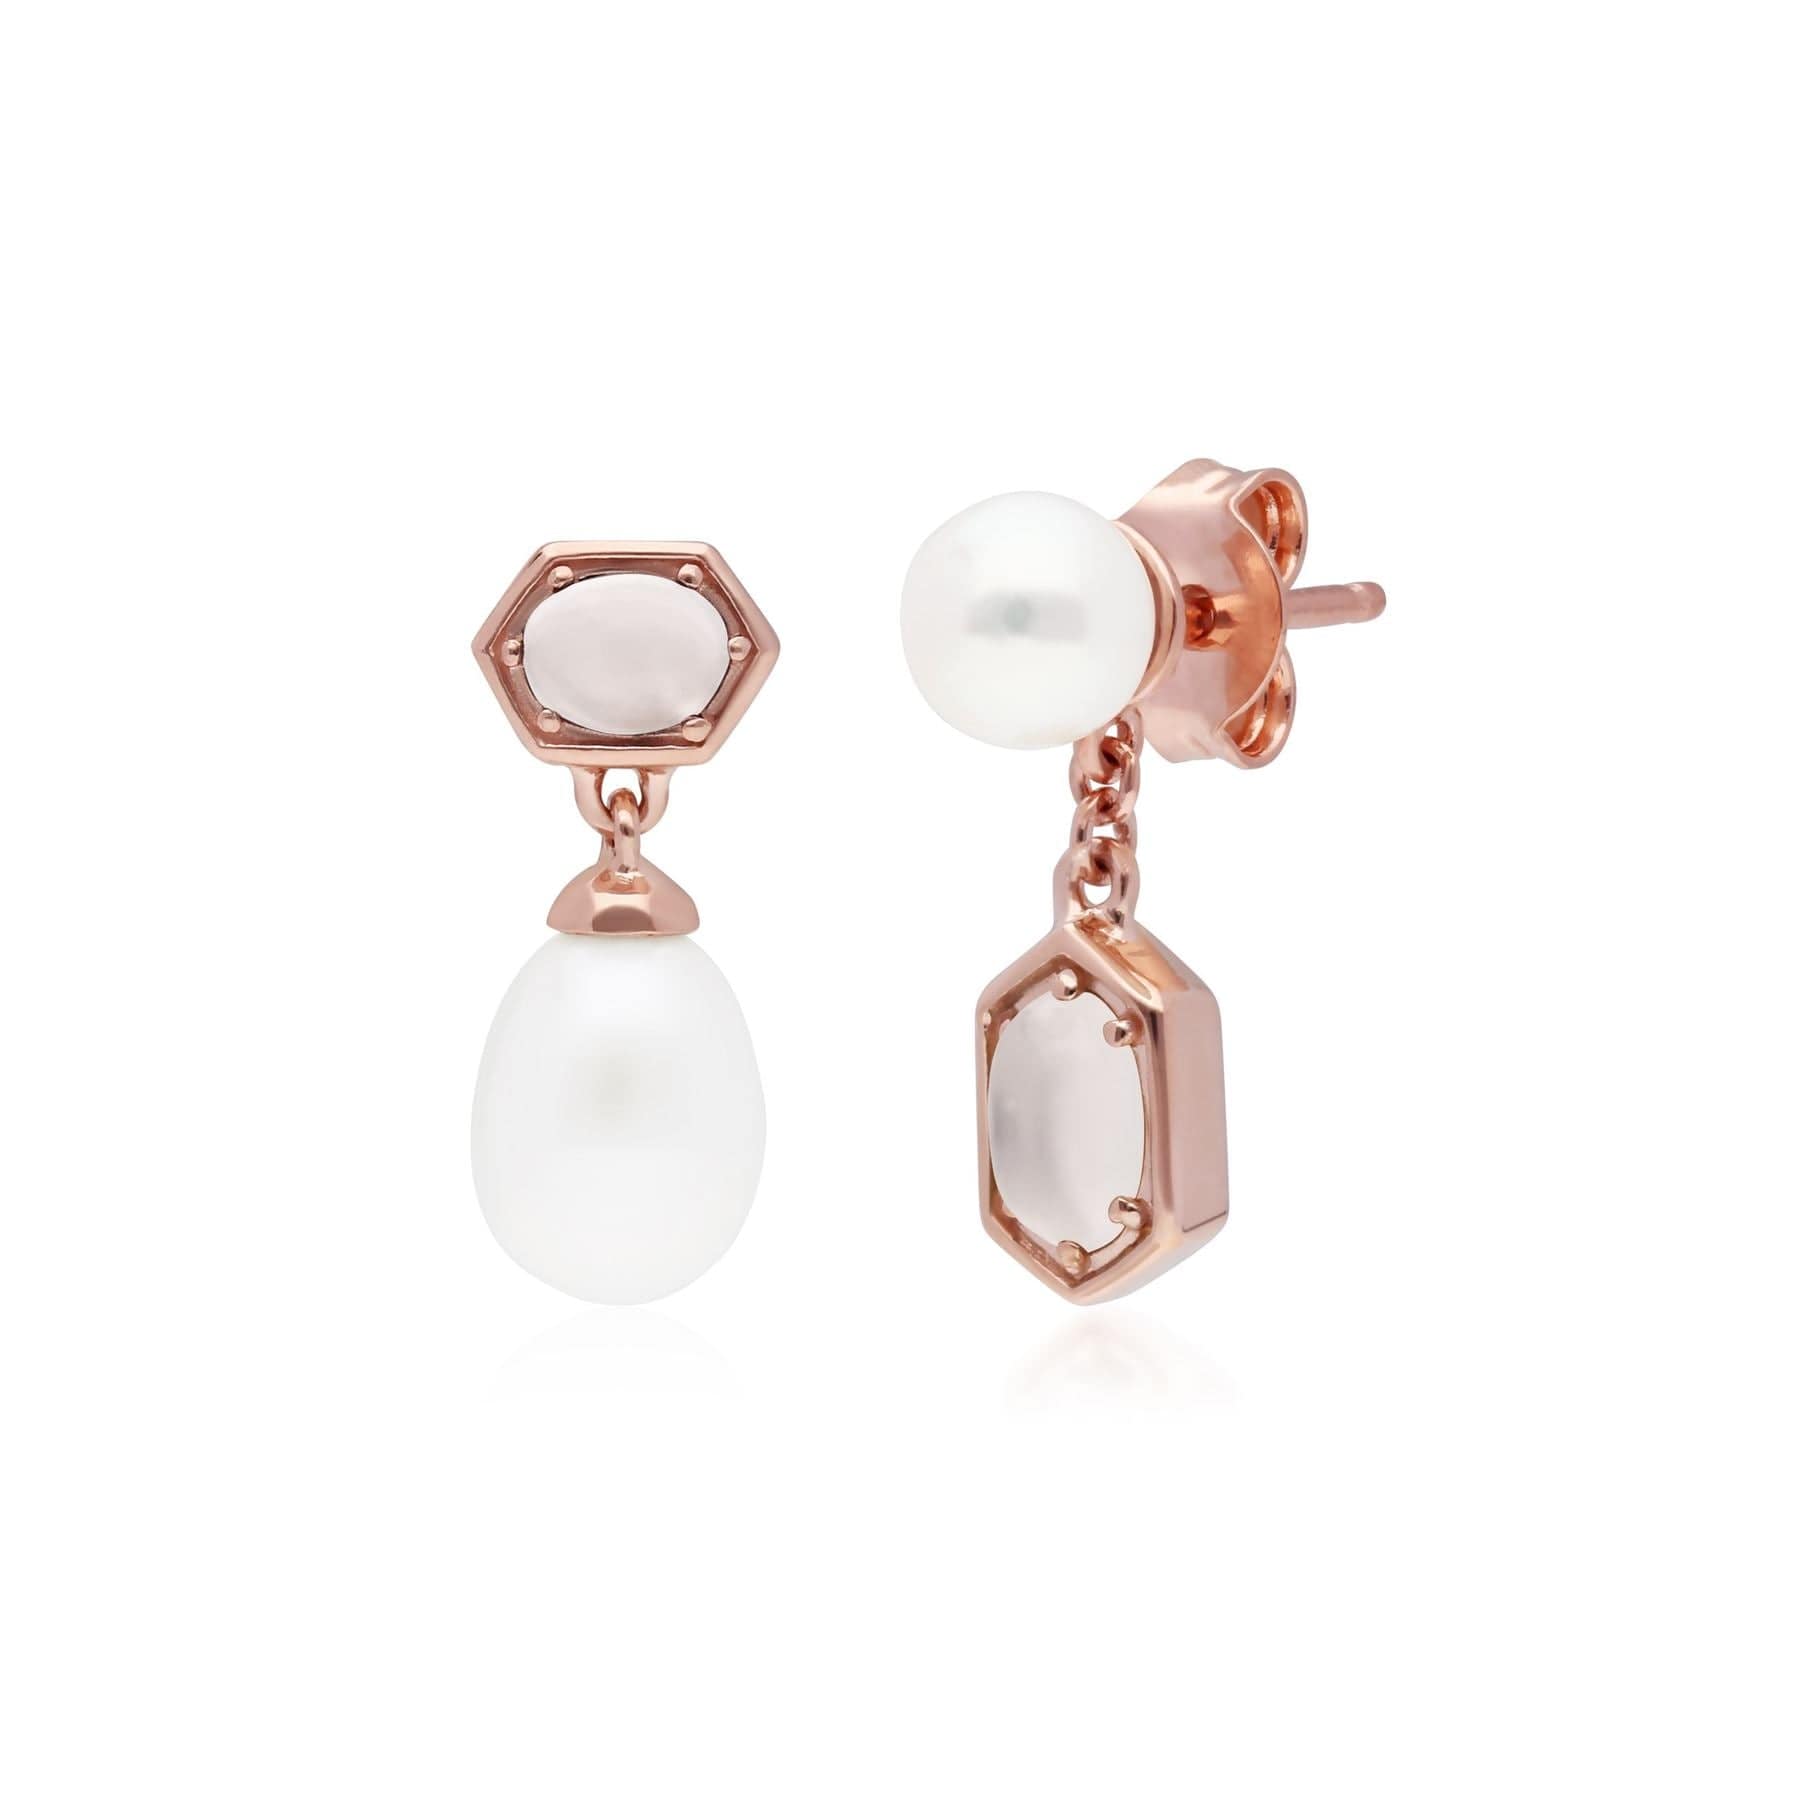 Modern Pearl & Moonstone Mismatched Drop Earrings in Rose Gold Plated Silver - Gemondo